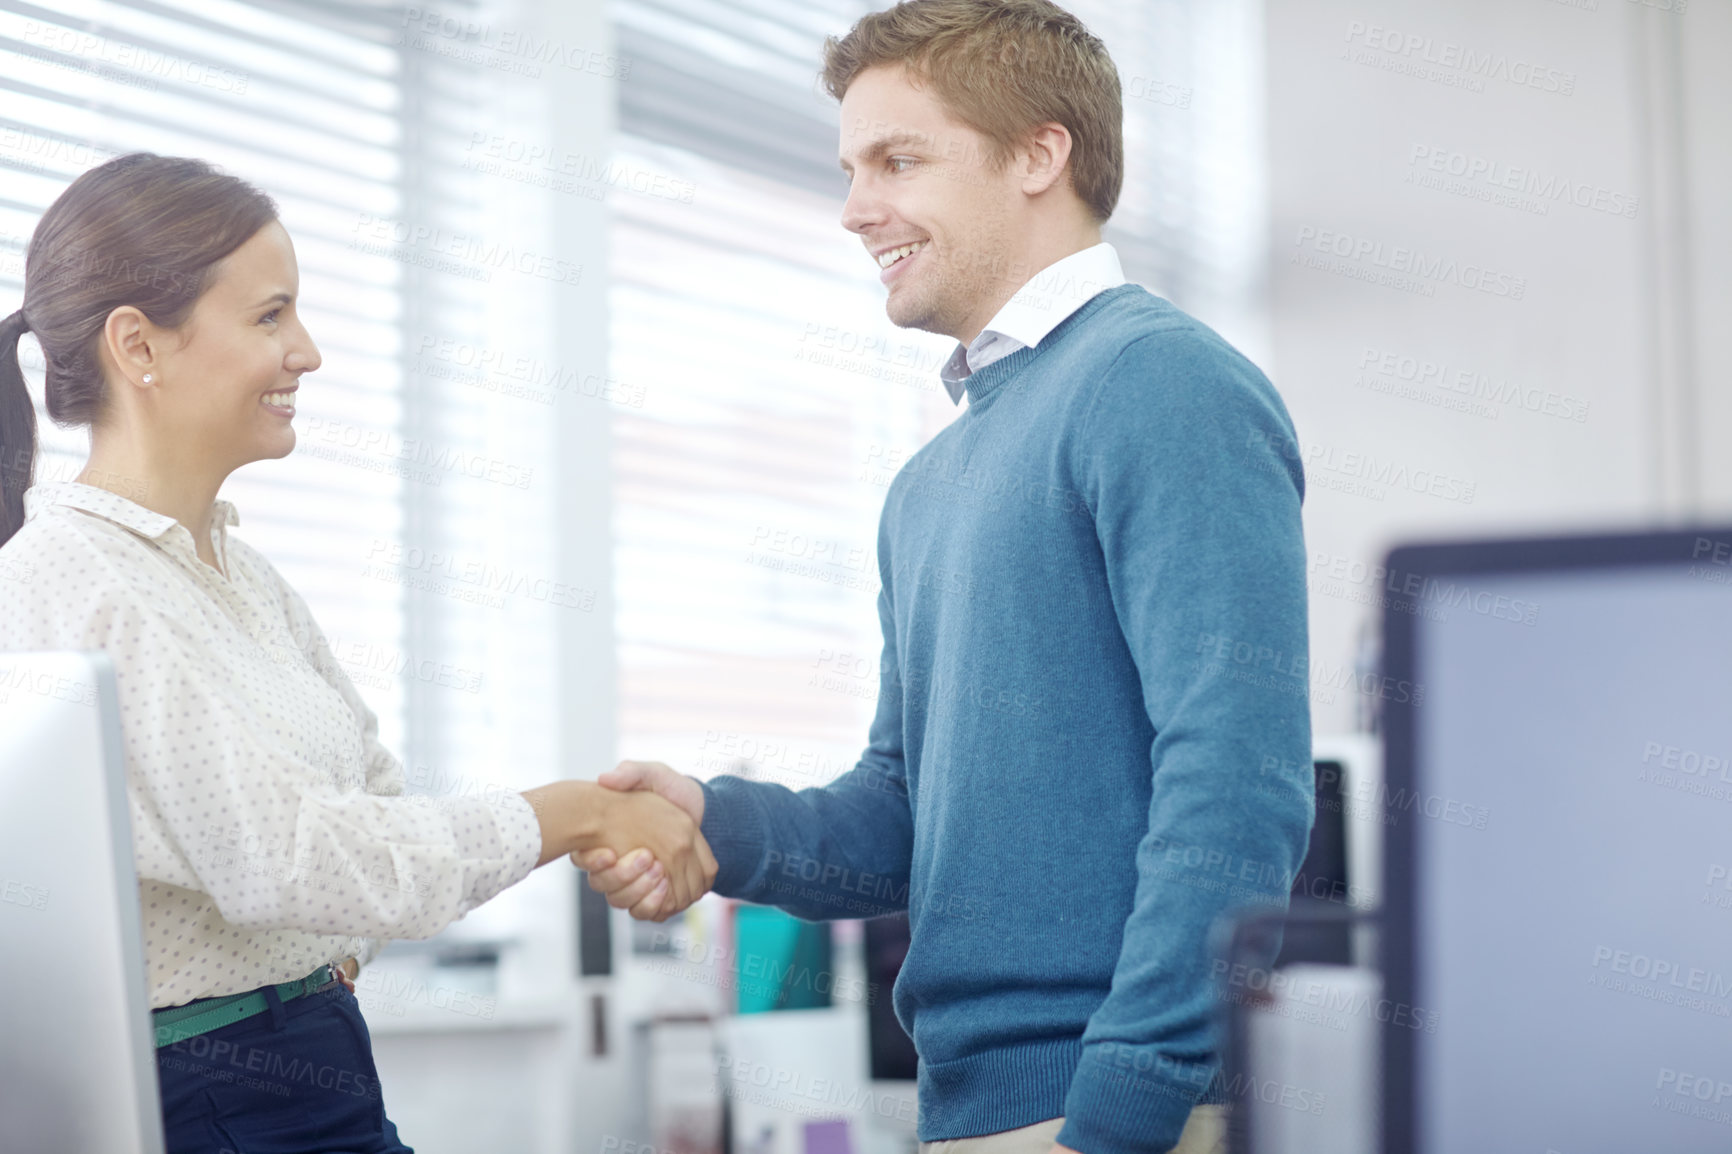 Buy stock photo Cropped shot of two young coworkers shaking hands